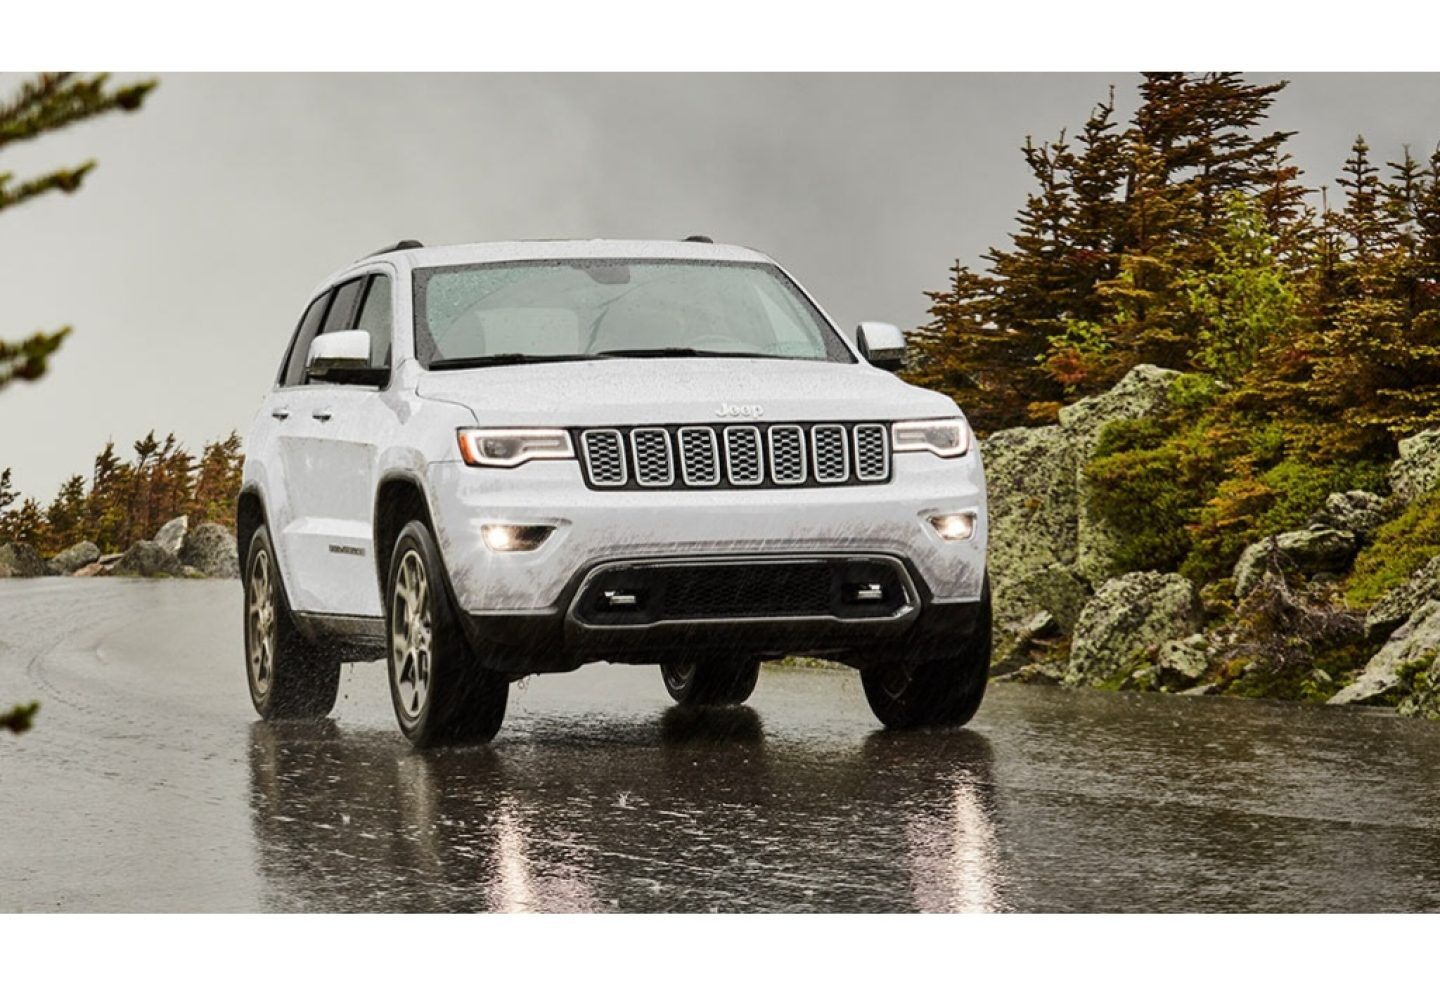 All-new 2021 Jeep® Grand Cherokee Breaks New Ground in the Full